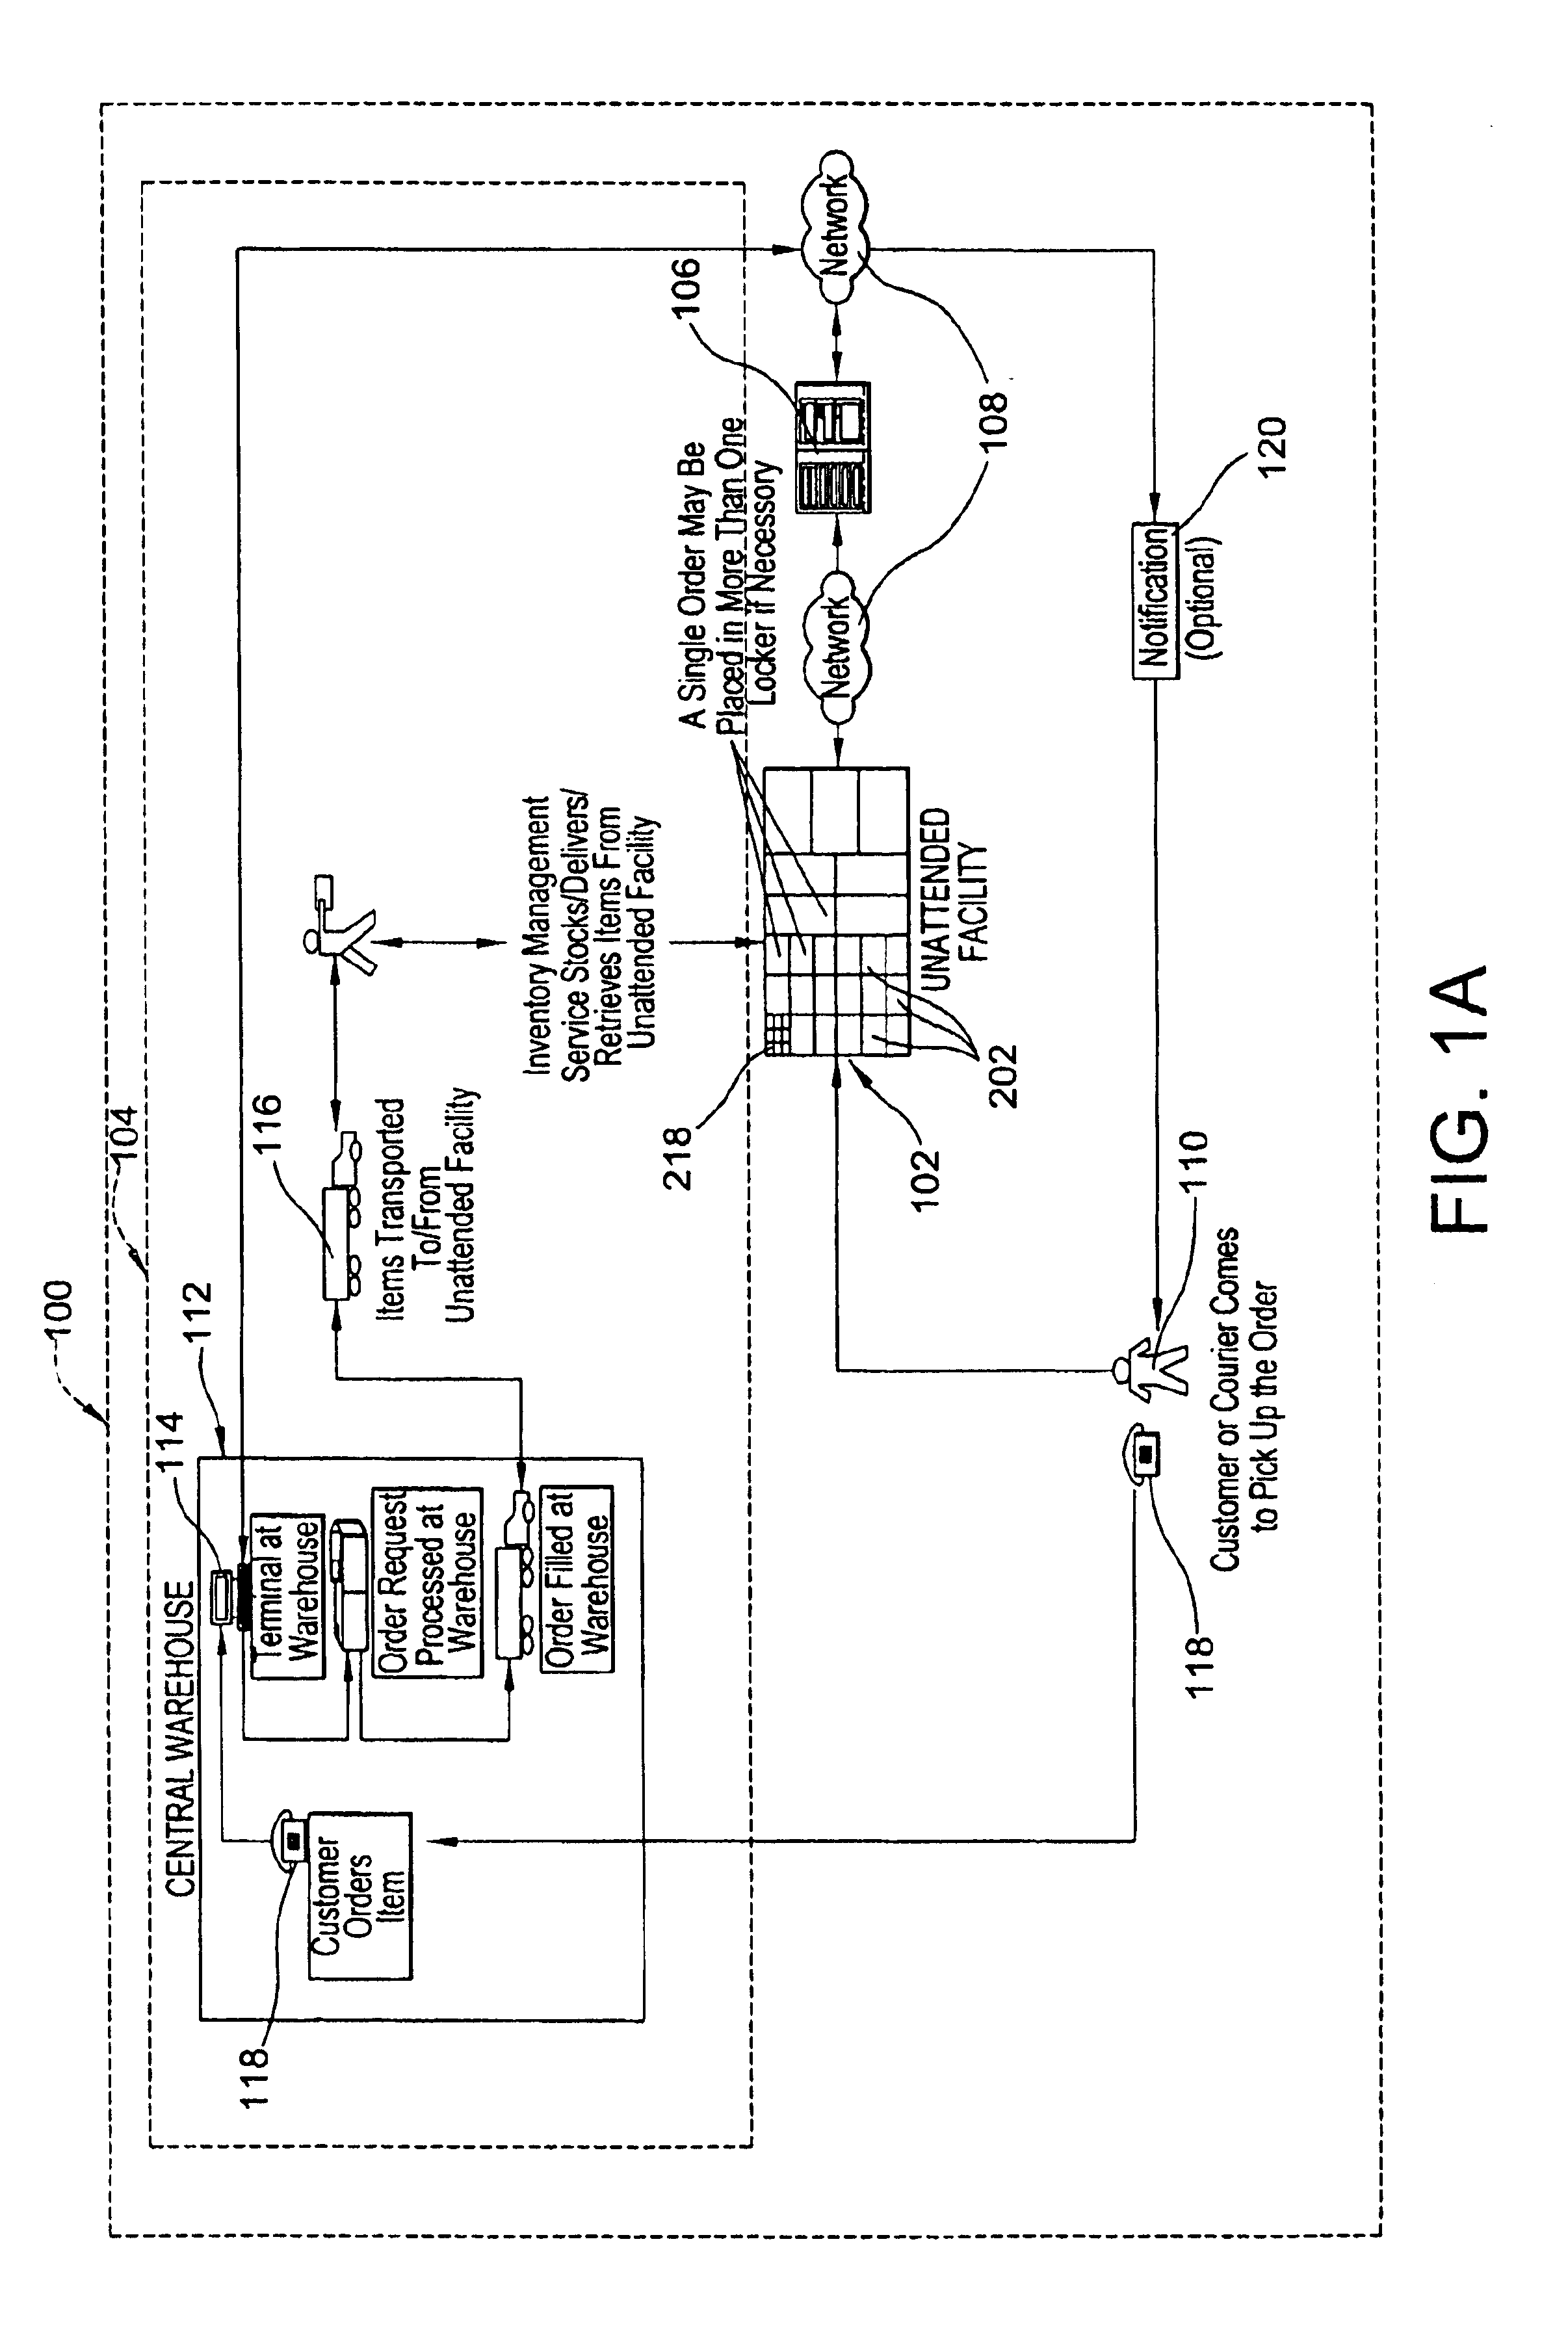 Systems and methods of inventory management utilizing unattended facilities